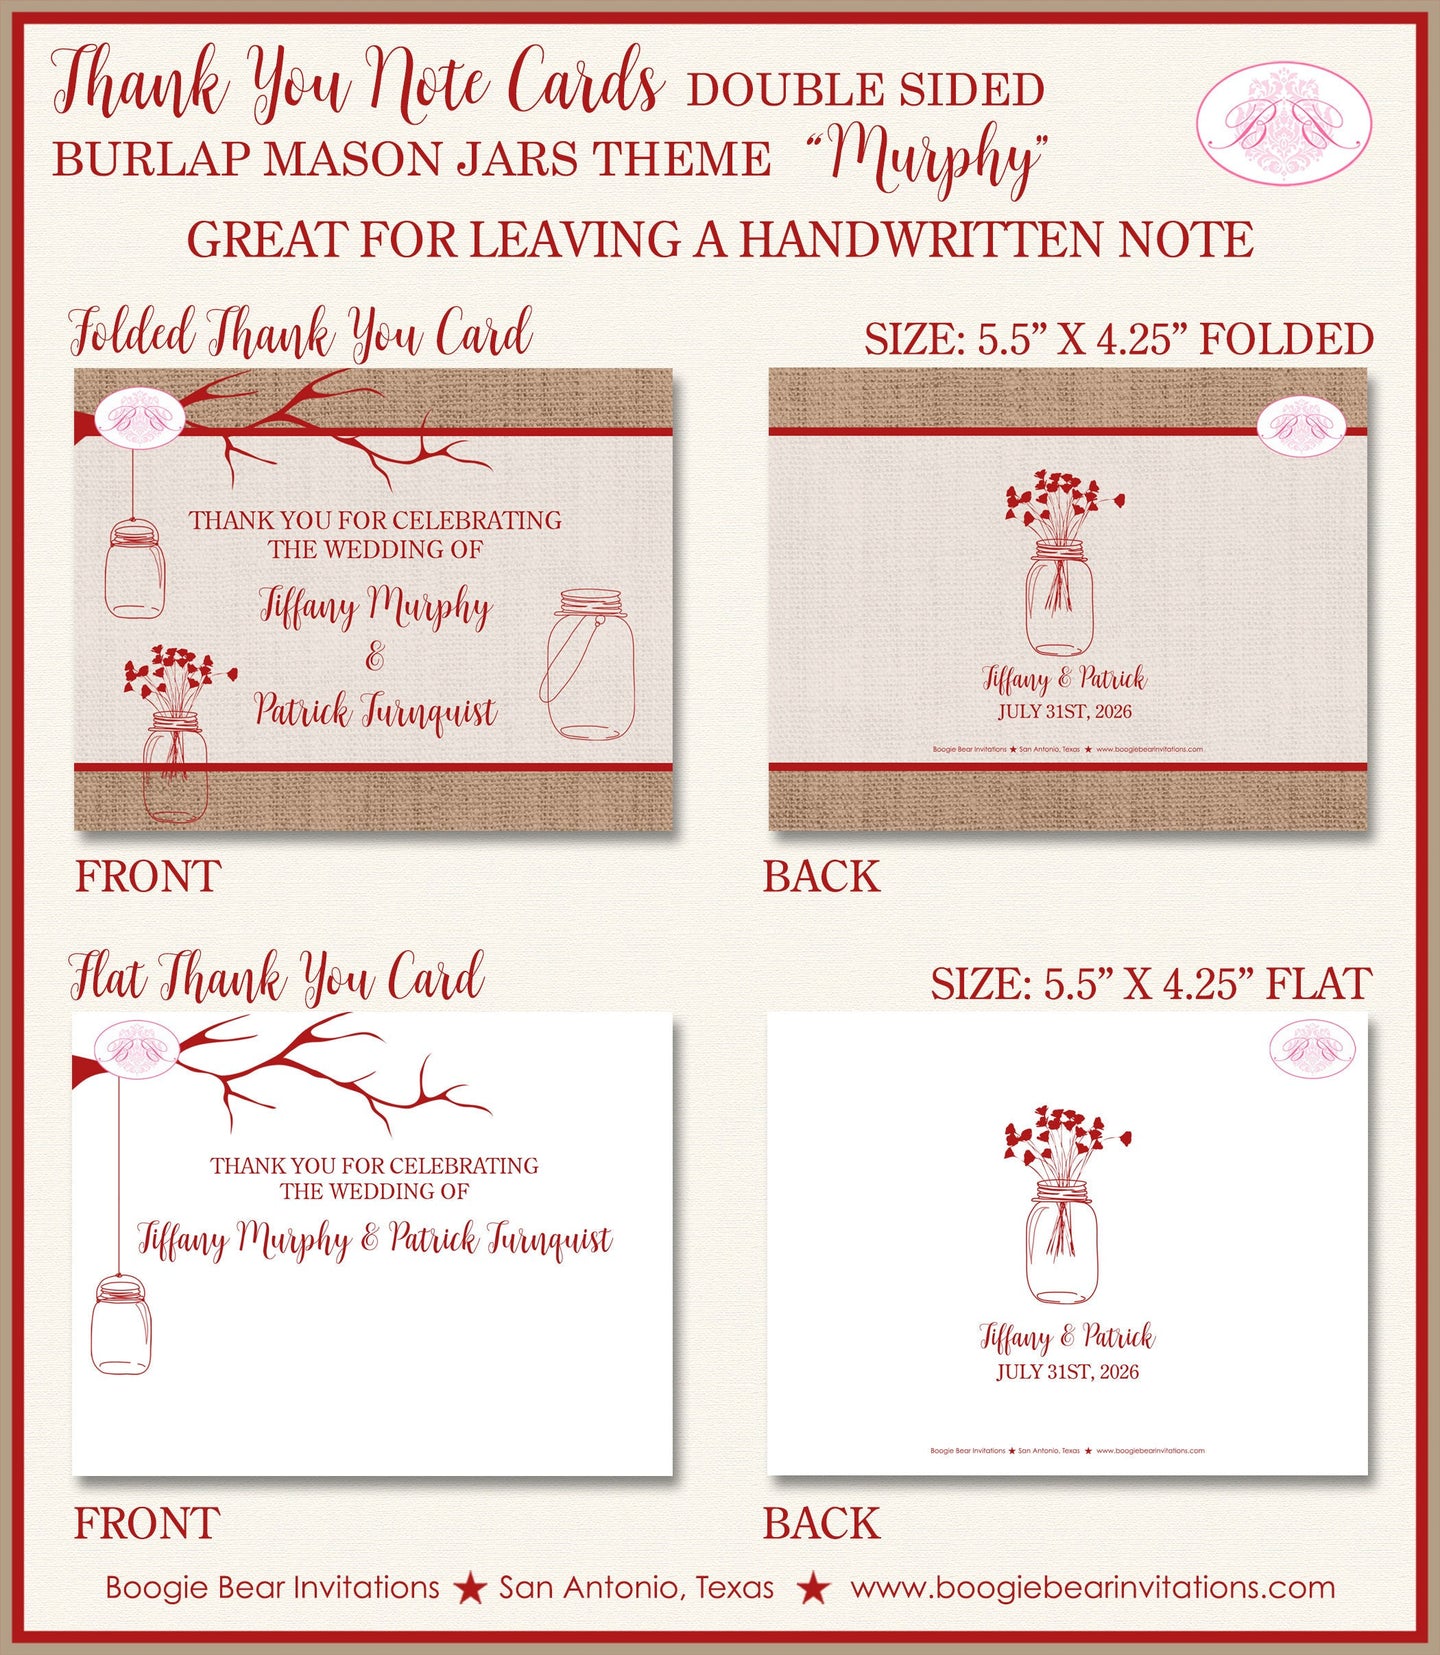 Mason Jars Thank You Card Wedding Party Red Burlap Farm Country Outdoor Summer Picnic Rustic Boogie Bear Invitations Murphy Theme Printed